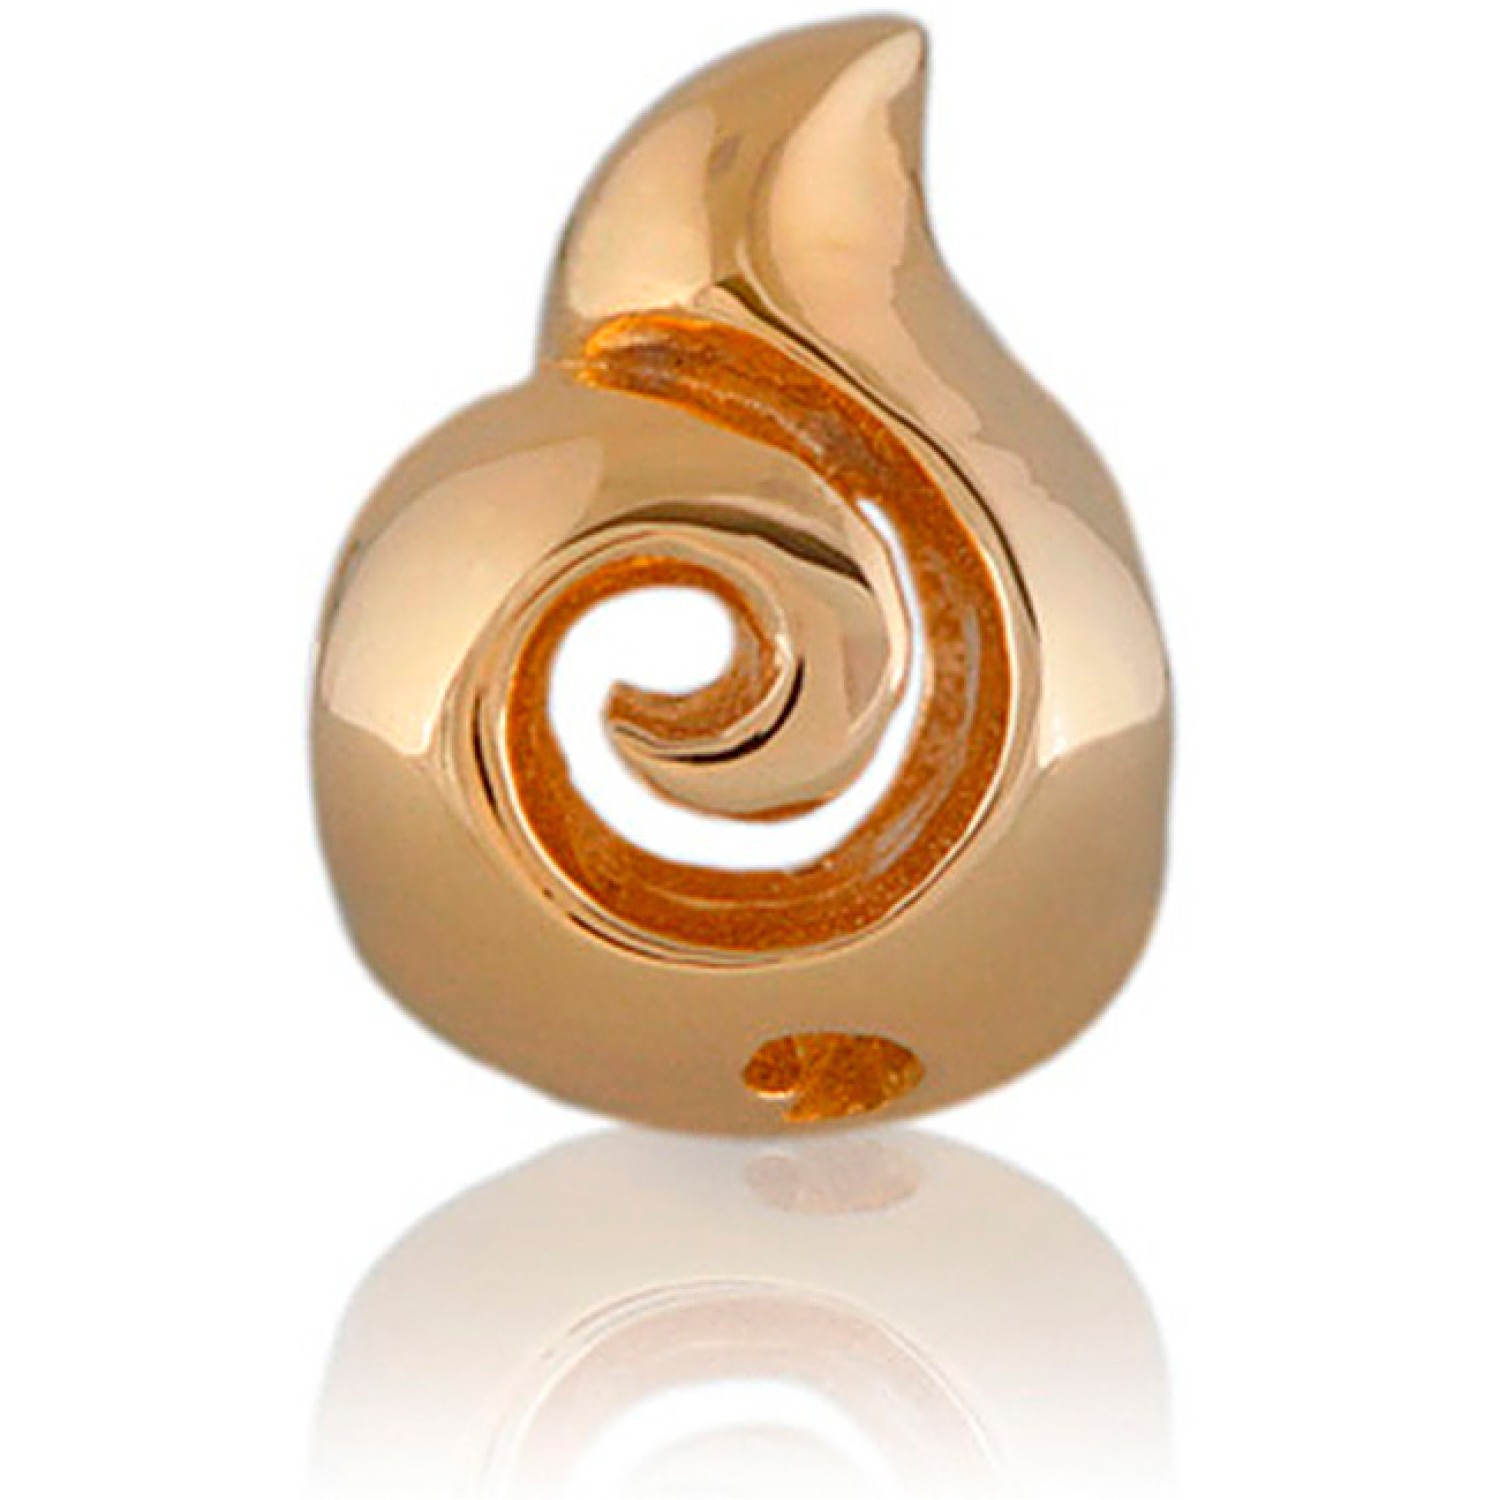 102G Evolve Charm Koru. Evolve New Zealand Inspired 9ct Koru Charm  The Evolve Koru charm represents the new, unfurling silver fern frond and is widely recognised as a symbol of new life, growth, strength and peace. This Evolve charm has s @christies.onli